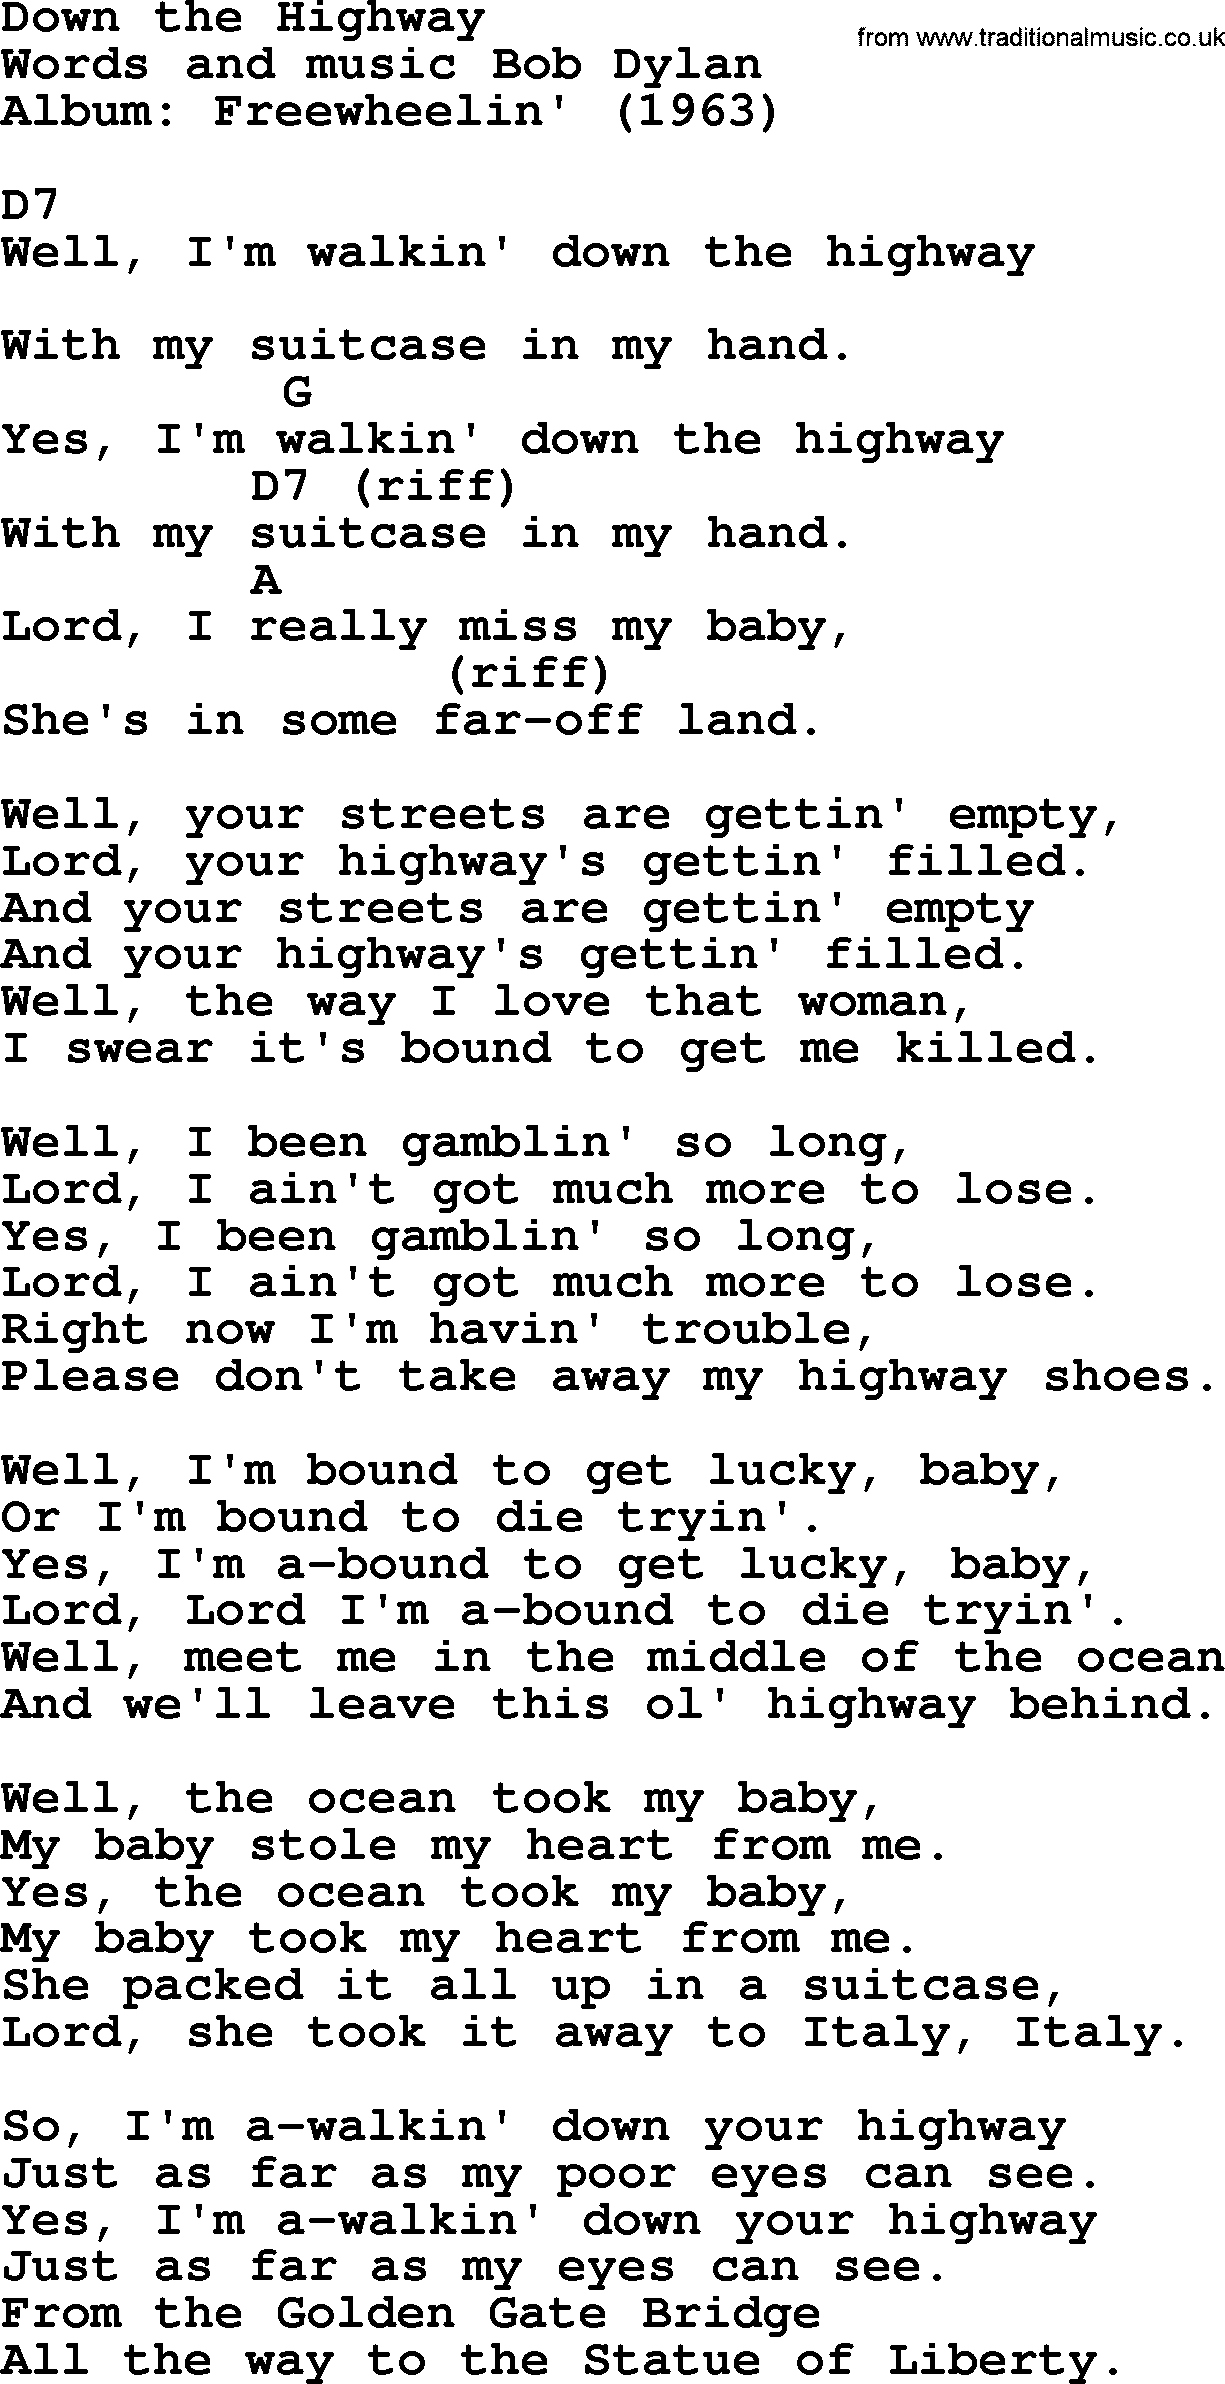 Bob Dylan song, lyrics with chords - Down the Highway